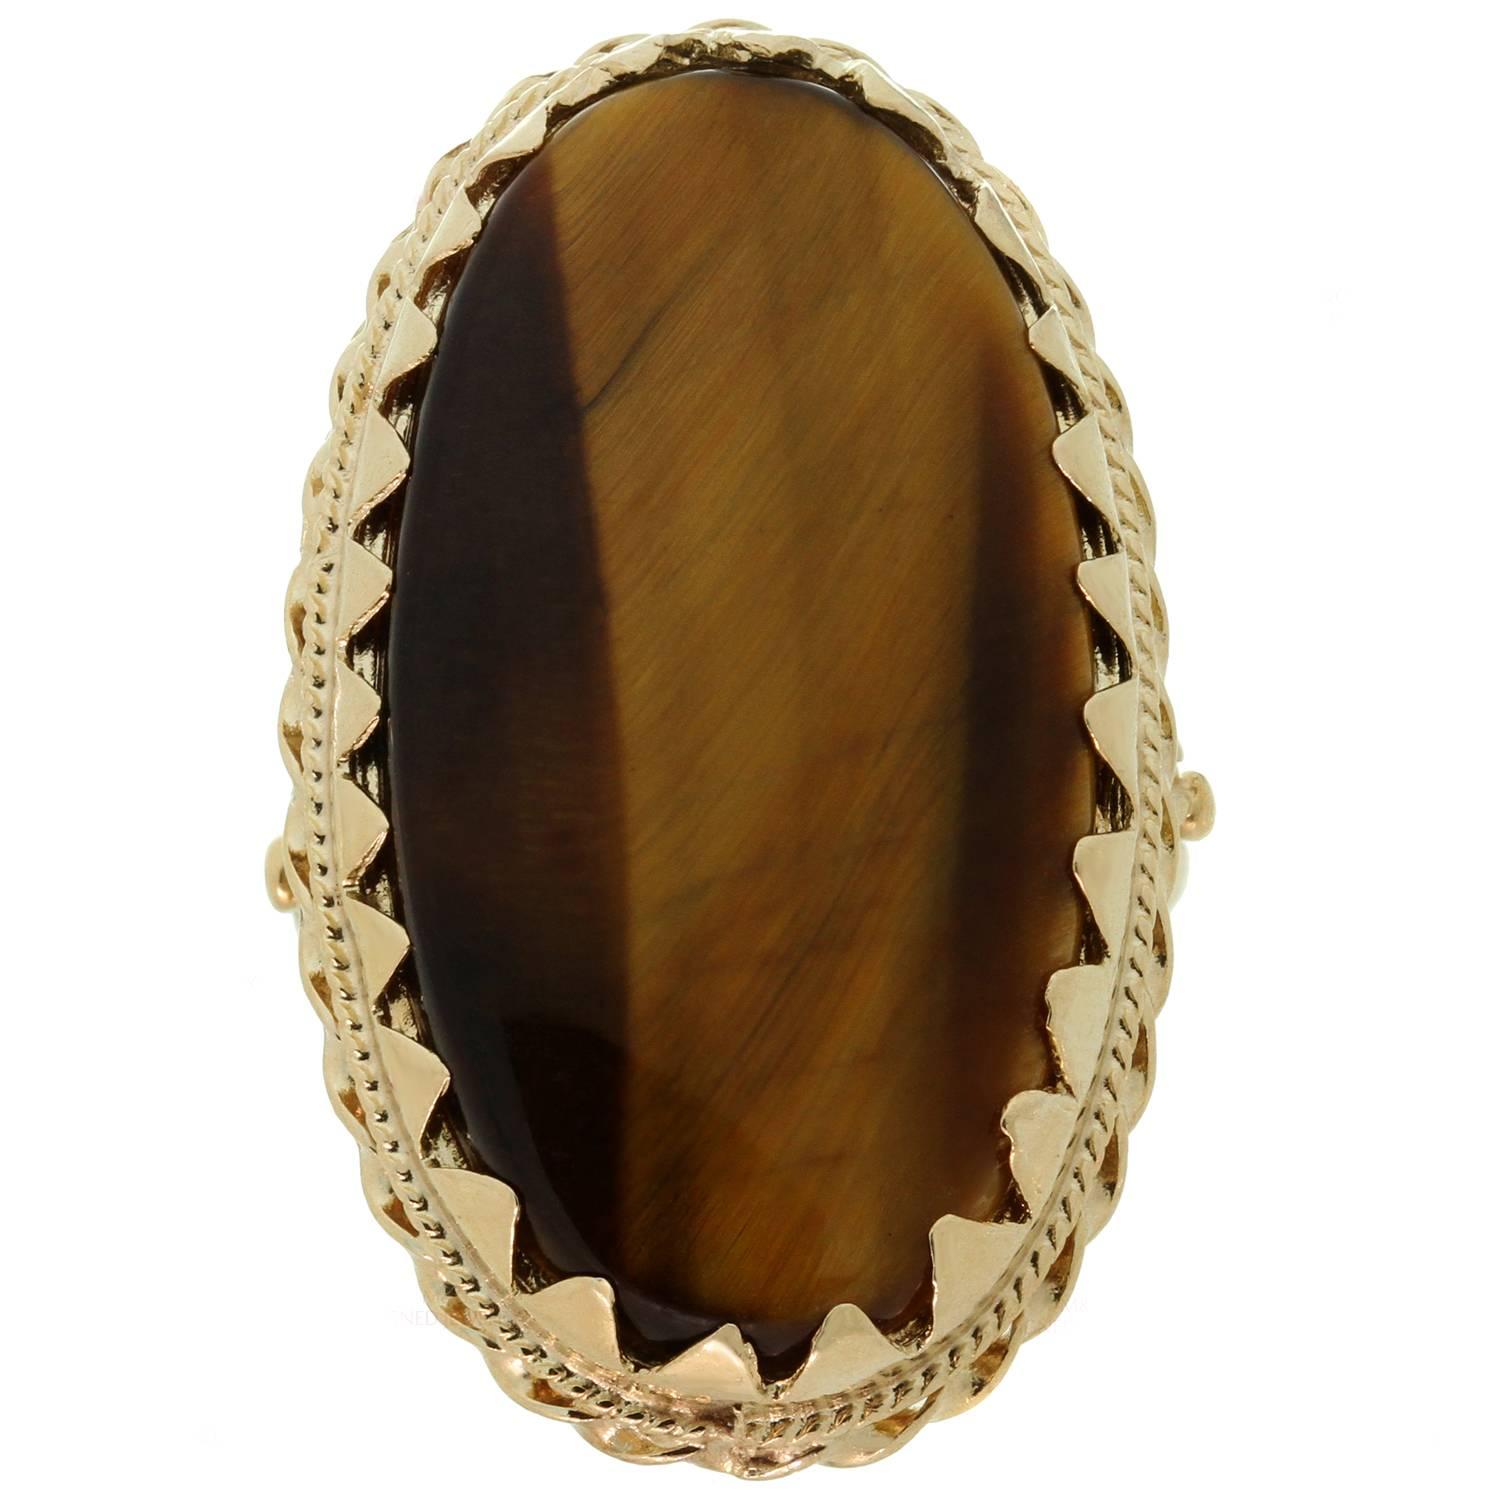 This elegant vintage ring is crafted in 14k yellow gold and beautifully accented with an oval Tiger's eye. Made in United States circa 1970s. Measurements: 0.78